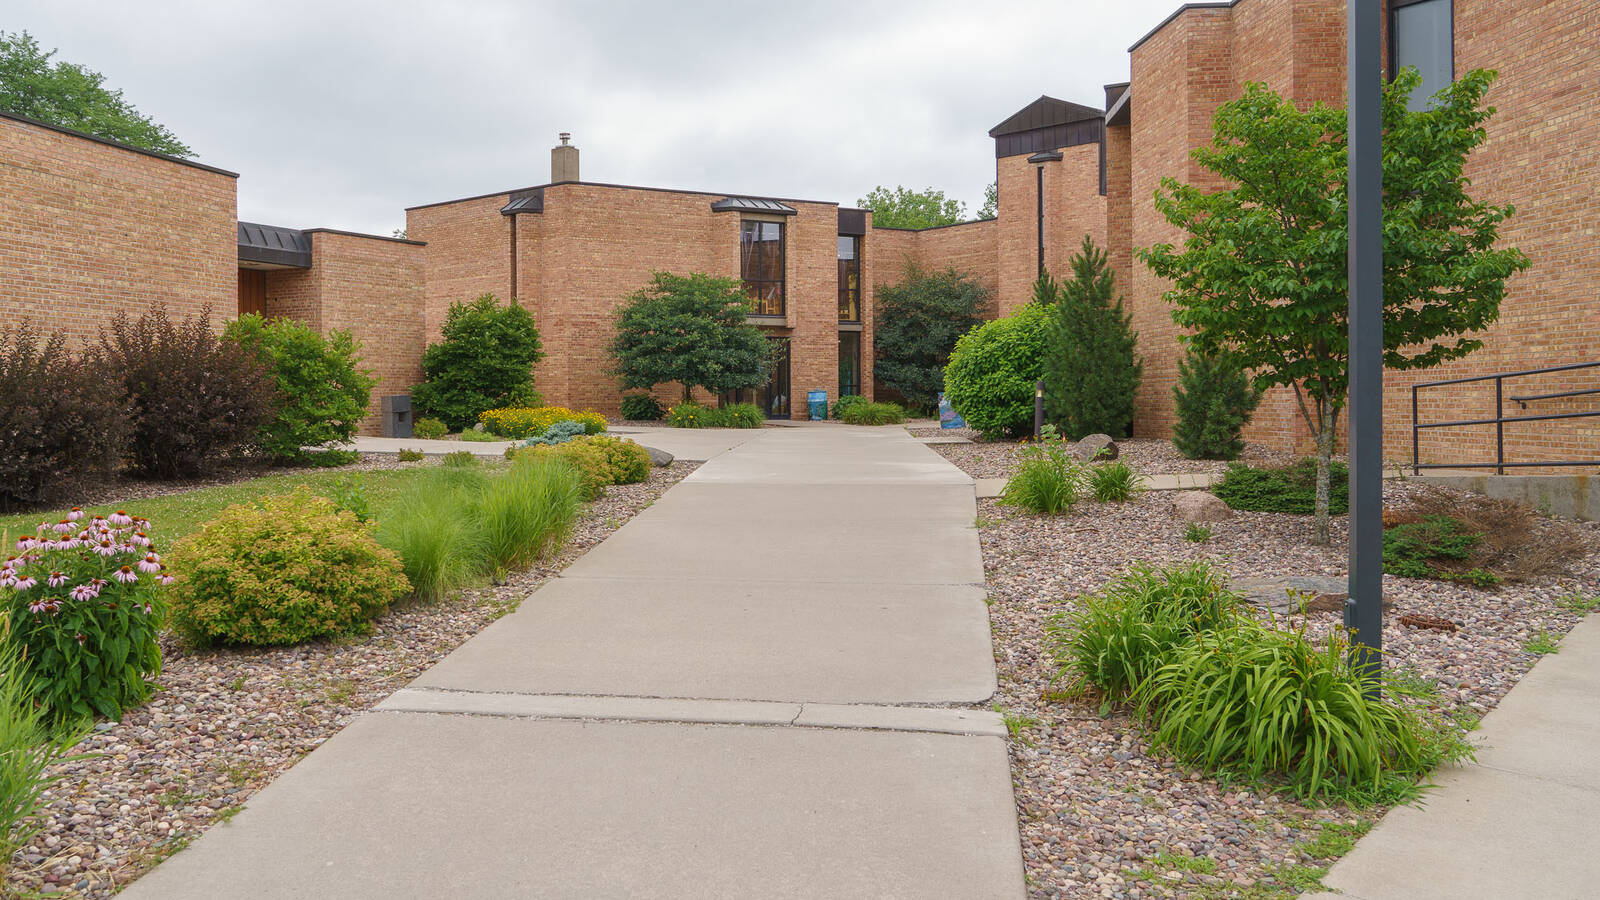 Exterior photo of Priory Hall, a brick residence hall with landscaping and sidewalks